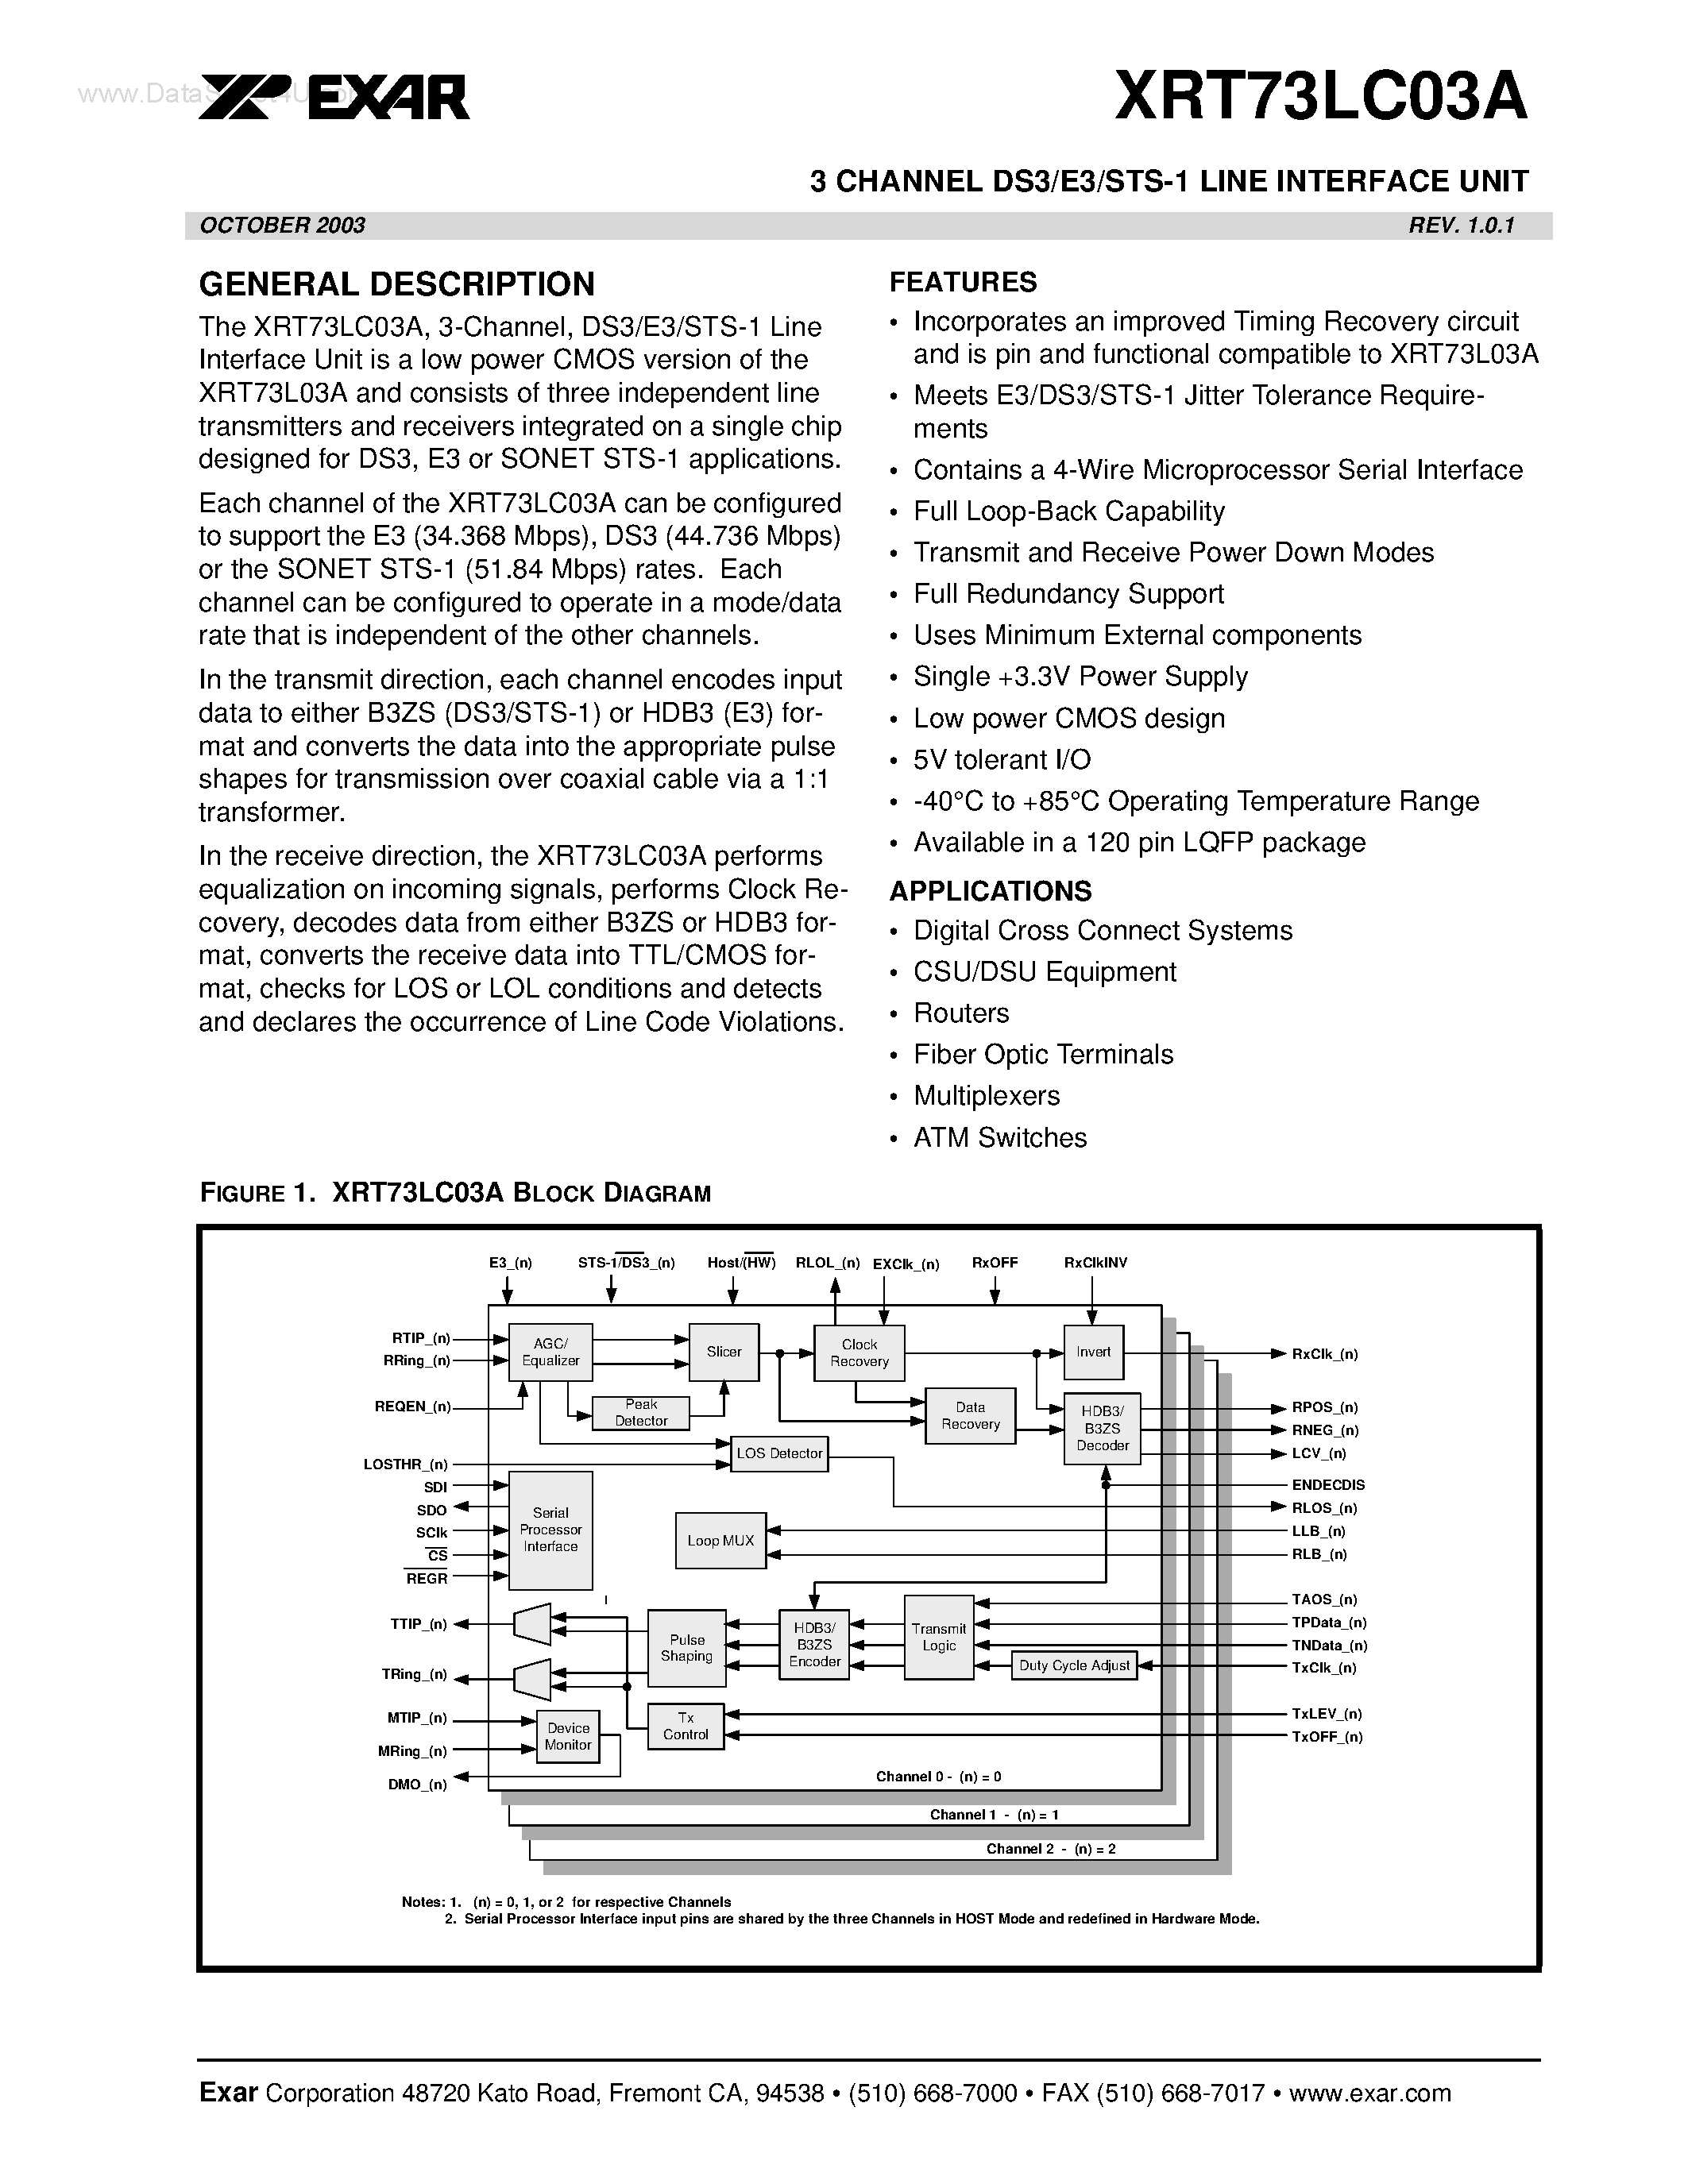 Datasheet XRT73LC03A - 3 CHANNEL DS3/E3/STS-1 LINE INTERFACE UNIT page 1